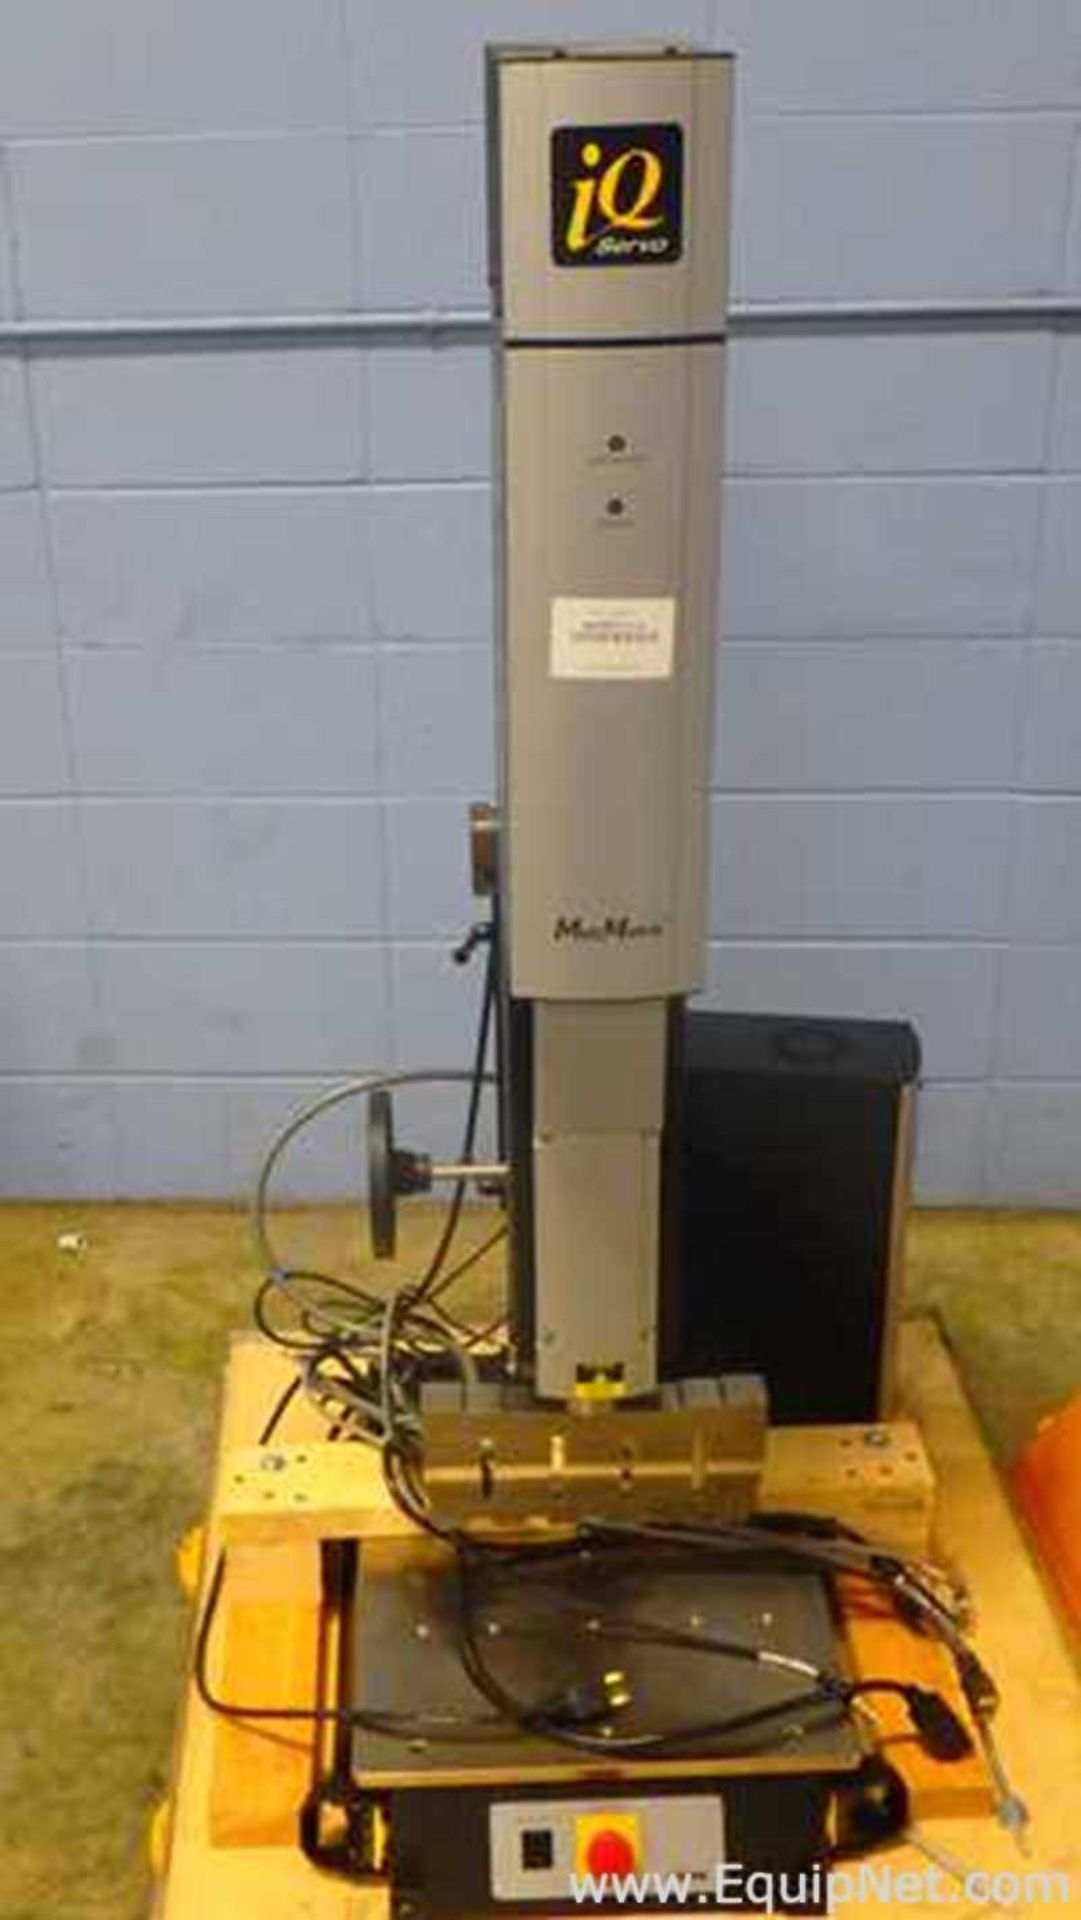 Unused Dukane iQ Sevo Ultrasonic Welding Units And Controller NEW IN CRATE - Image 2 of 5